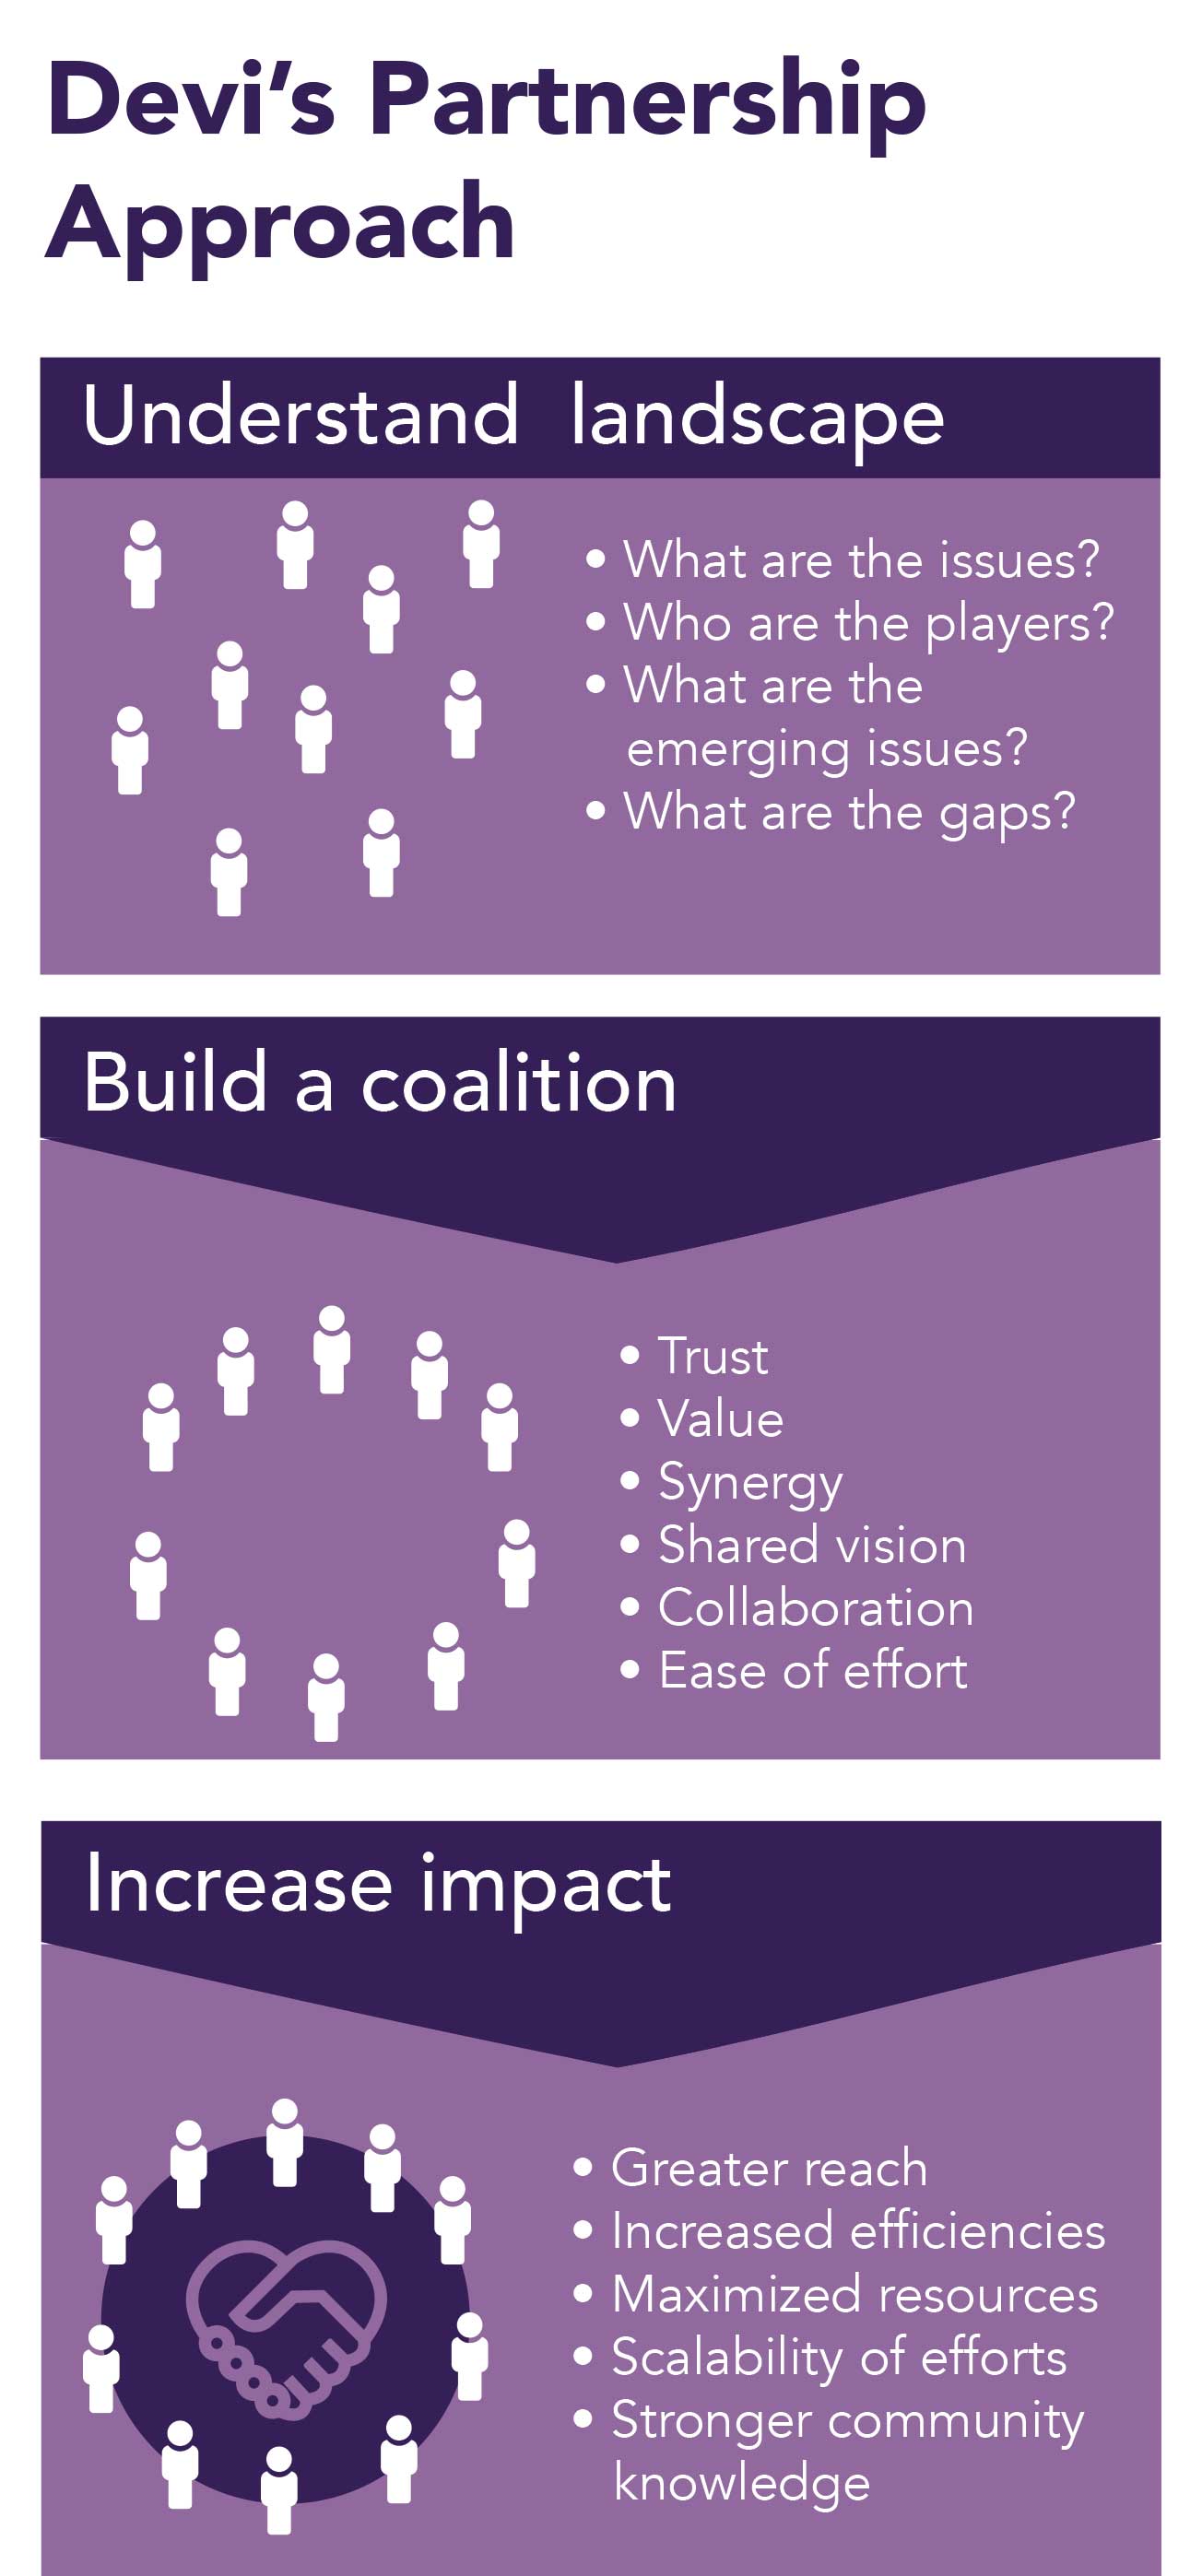 Devi's partnership approach is based on trust, value, and a shared vision.